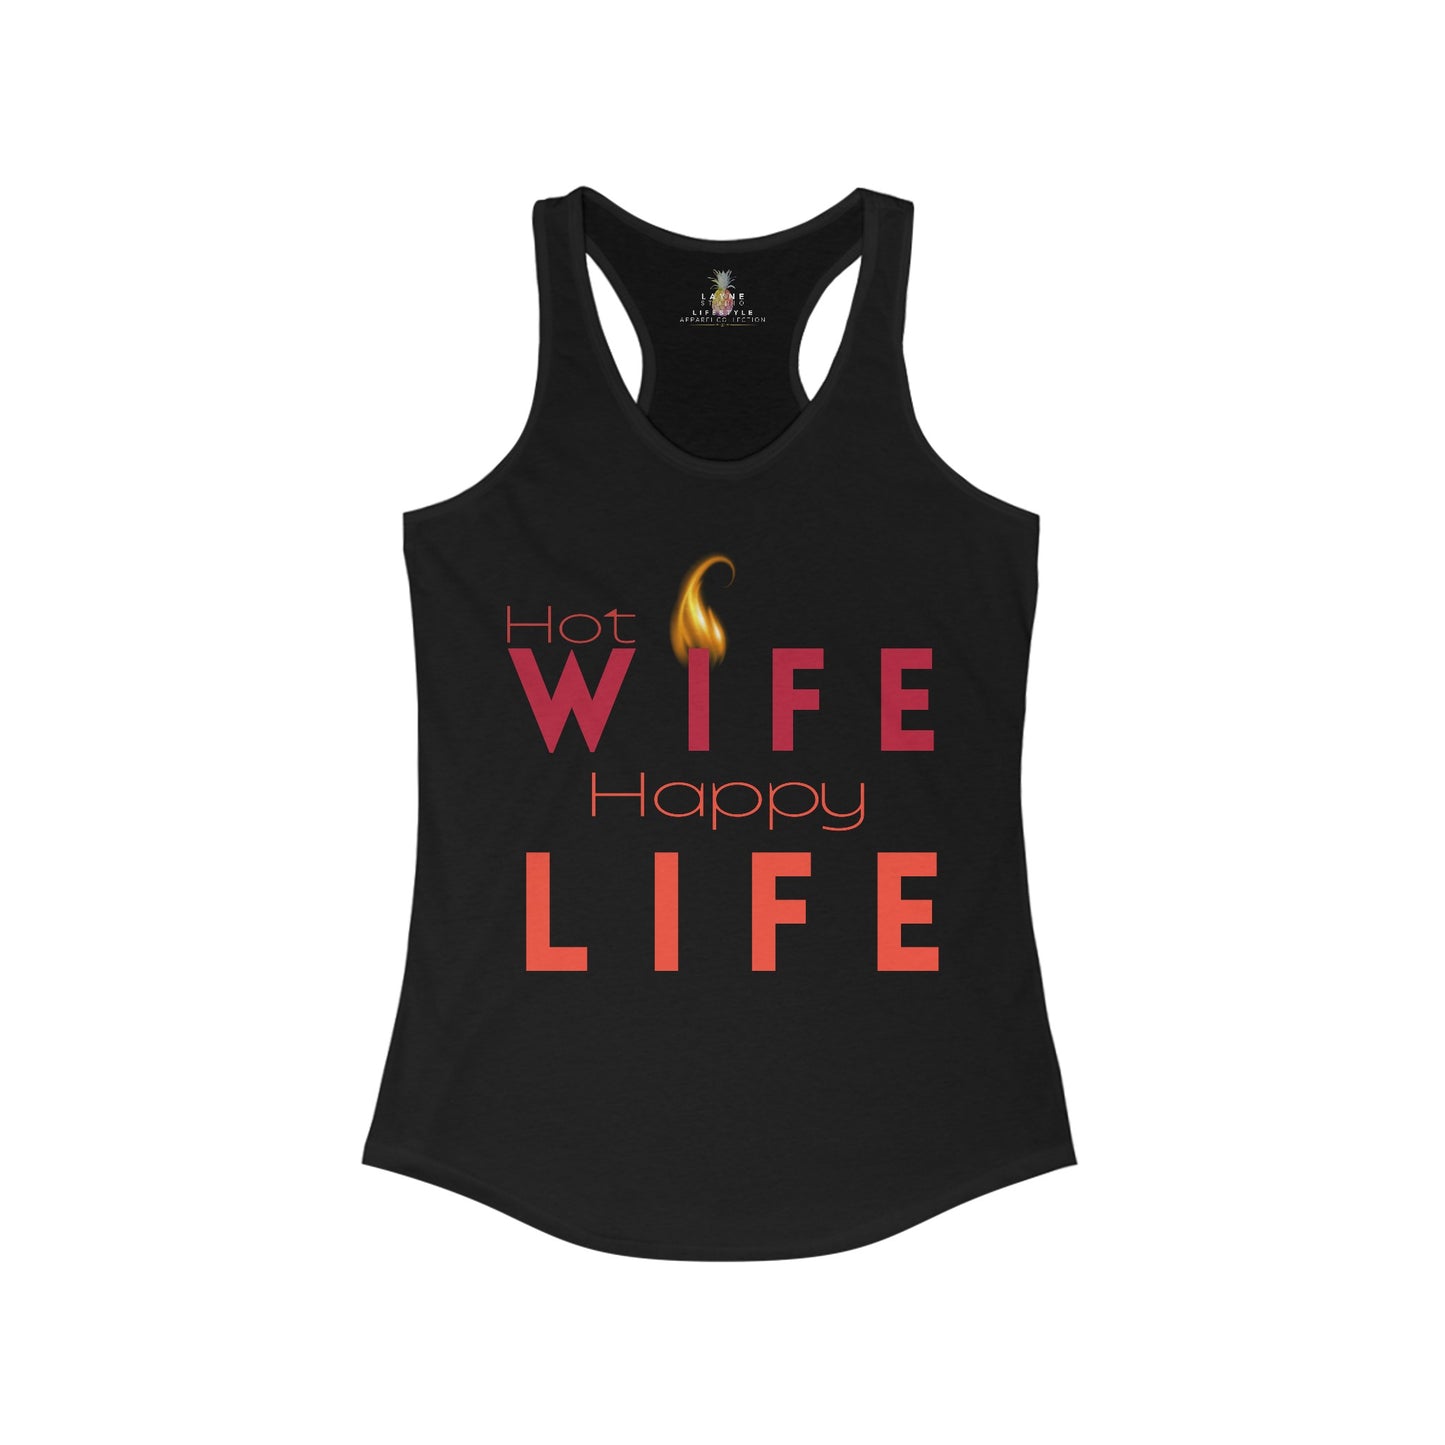 Front View of Layne Studios "Hot Wife Happy Life" Graphic Solid Black Racerback Tank-Top